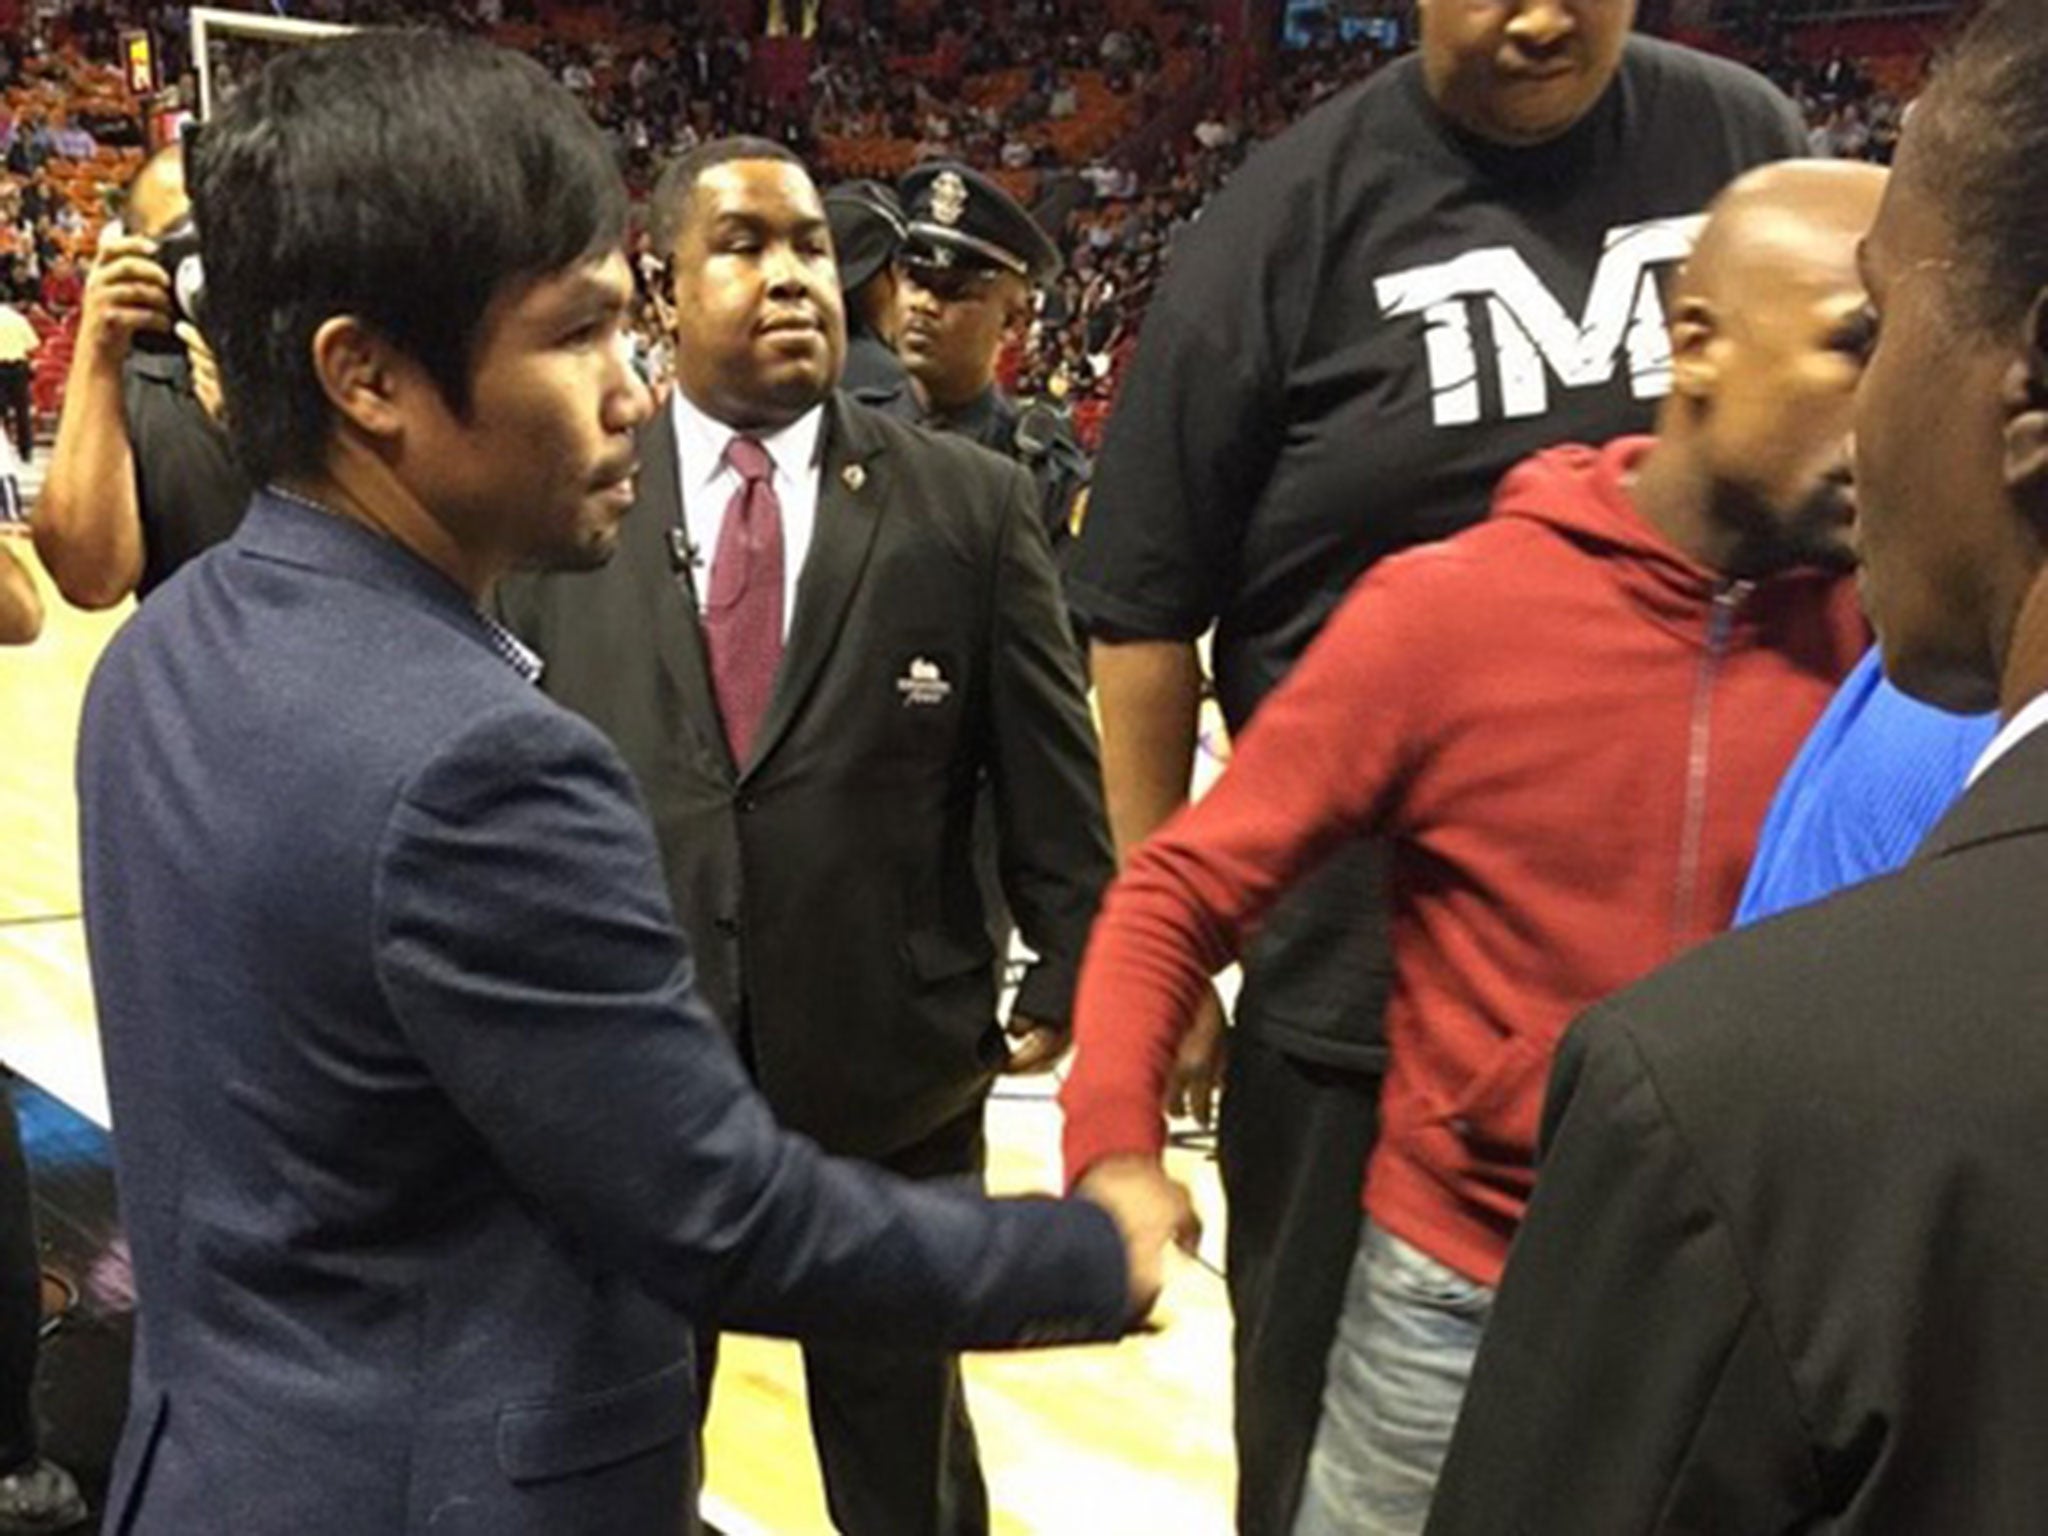 Manny Pacquiao and Floyd Mayweather shake hands at the Miami heat NBA game last night